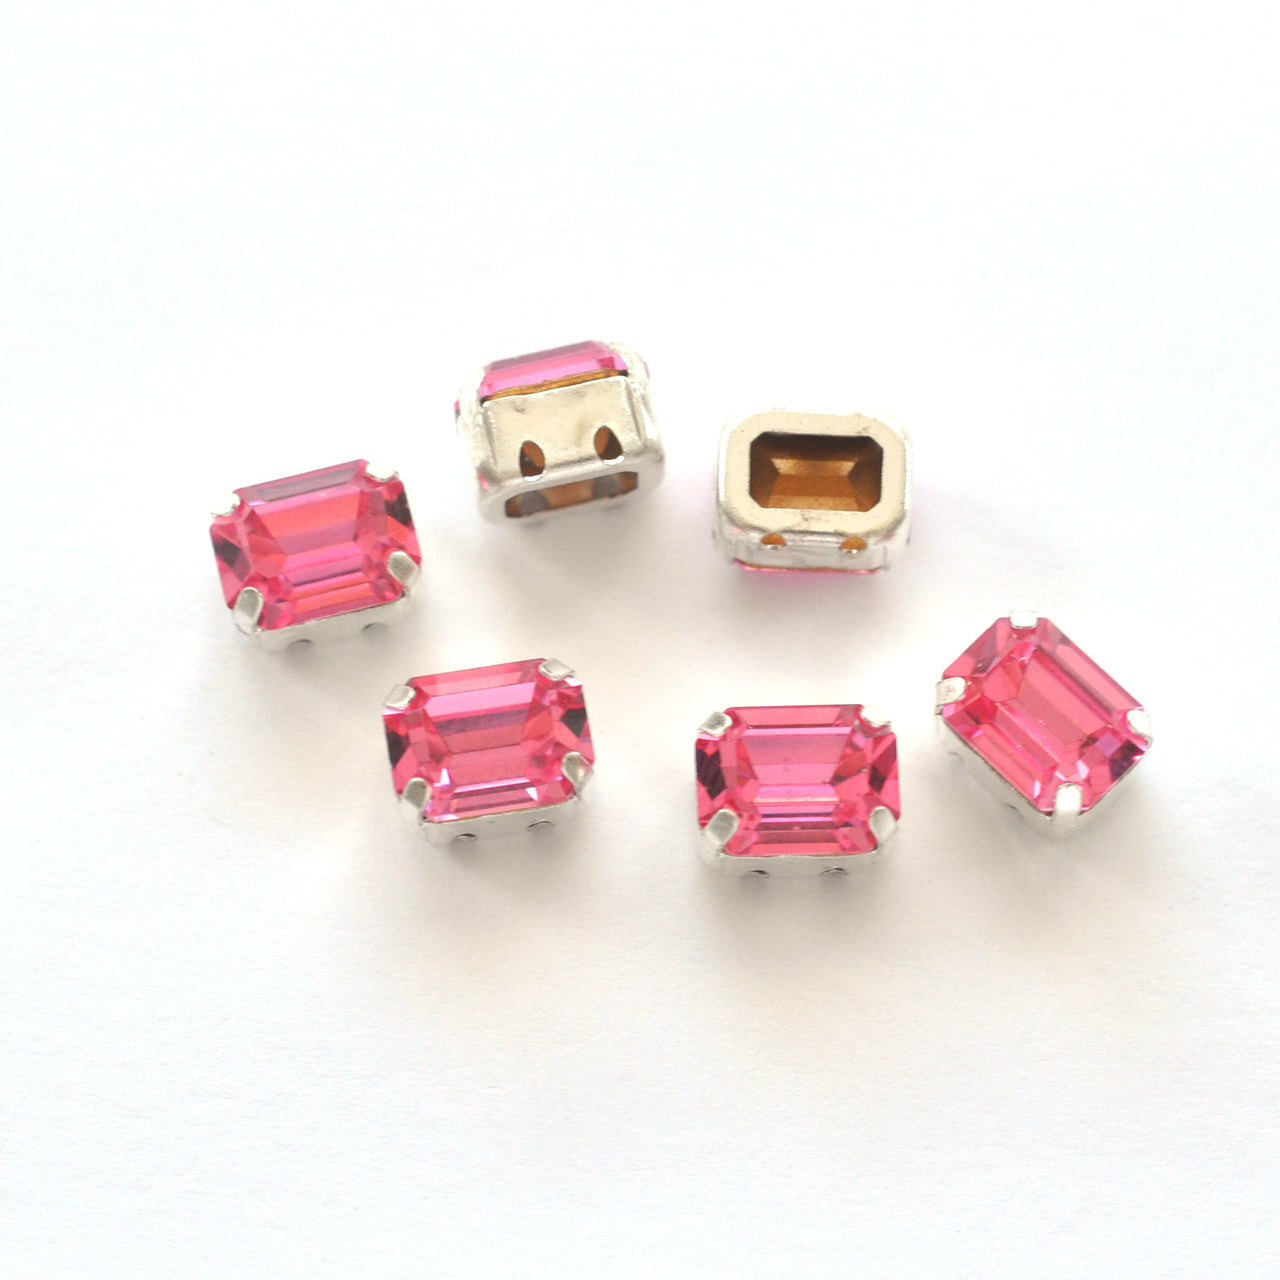 Rose 8x6mm Octagon Sew On Crystals - 6 Pieces